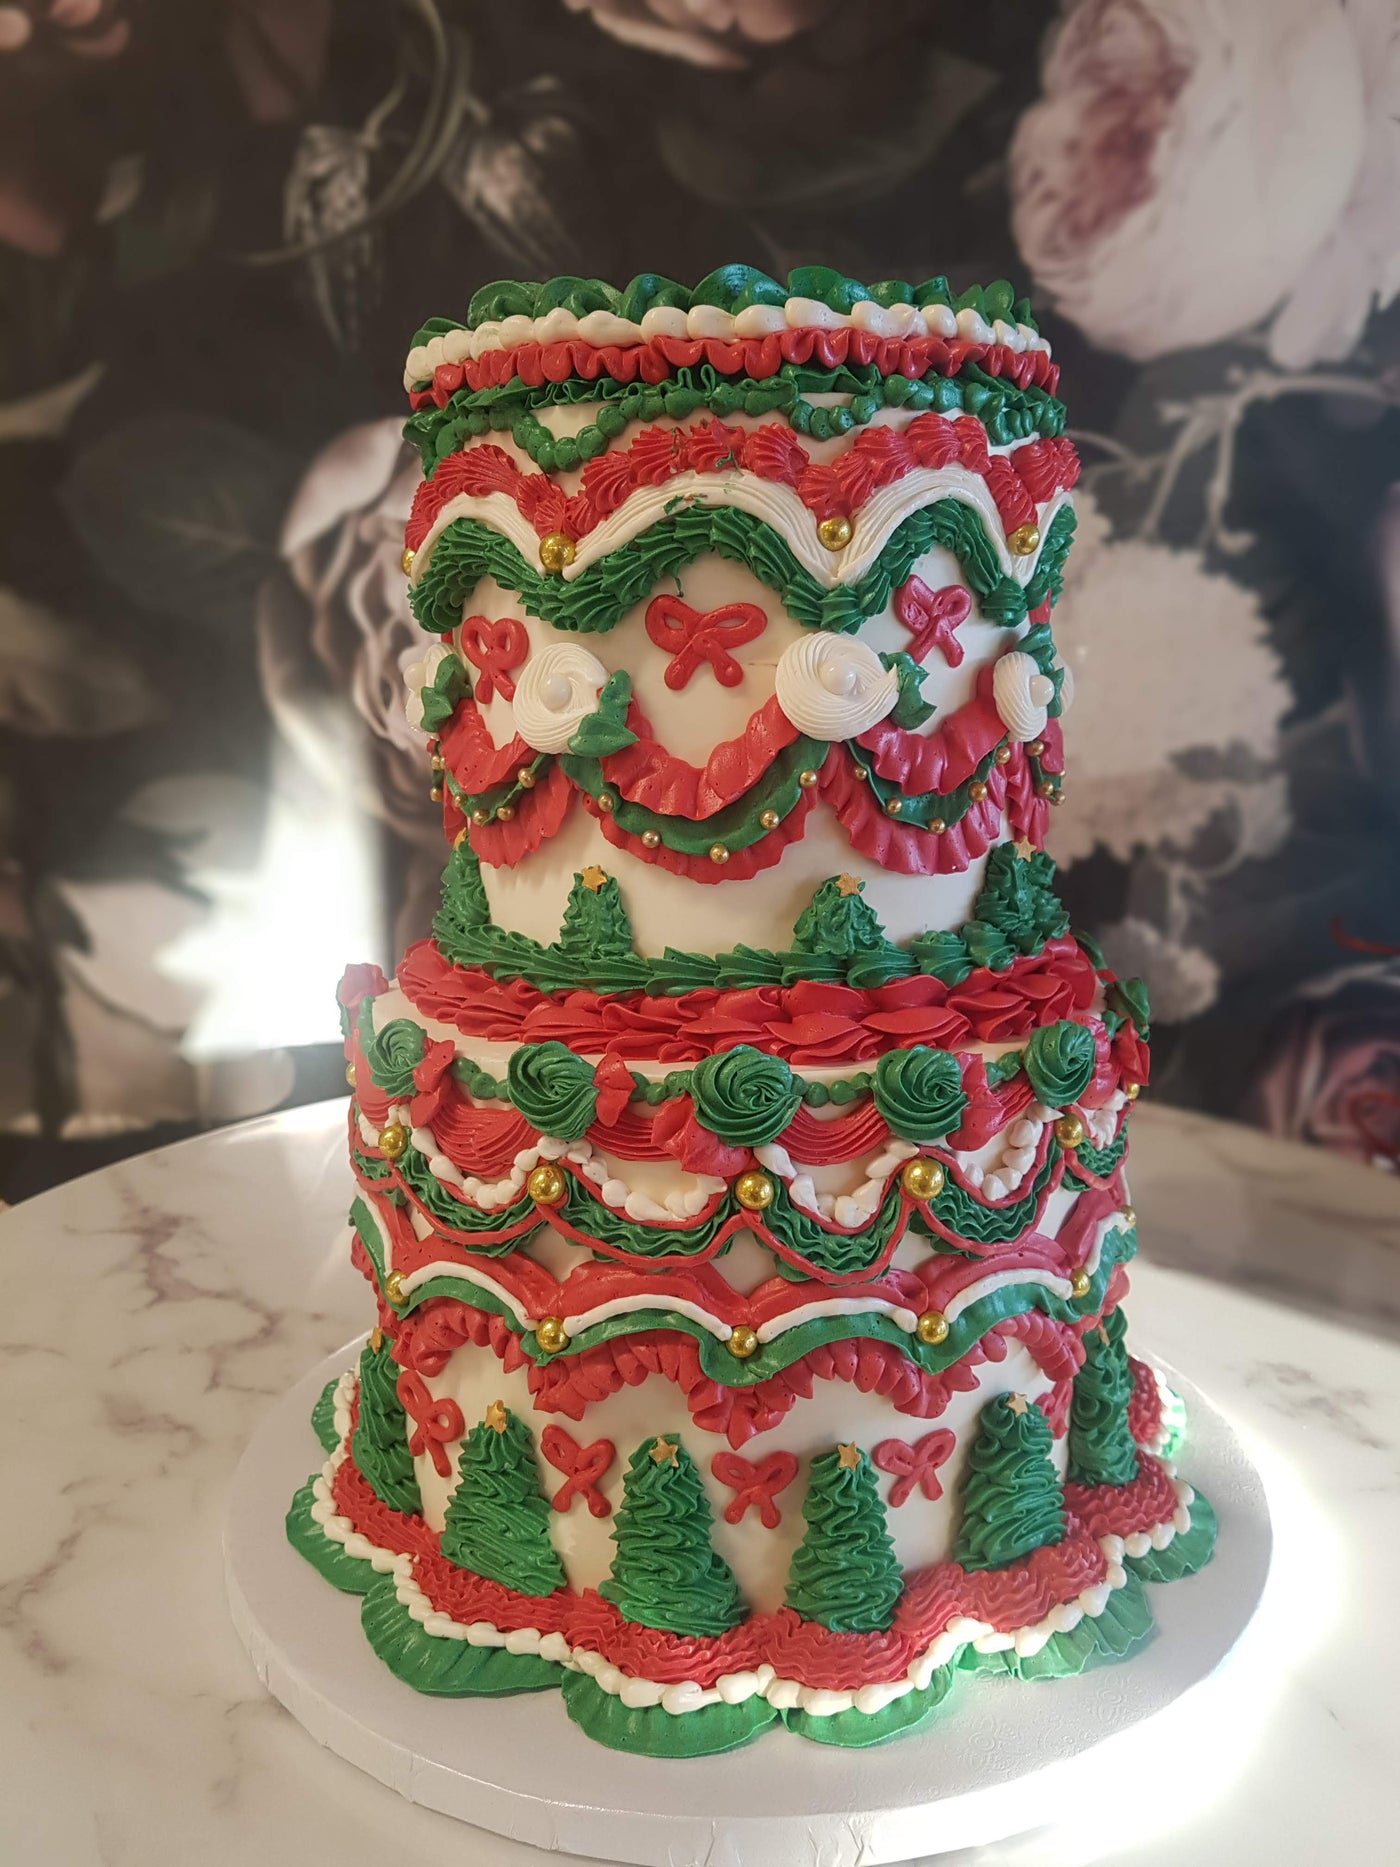 Christmas party cake, party city, las vegas christmas, Summerlin cakes, best cakes in las vegas, most voted cakes, most ordered cake, elite cakes